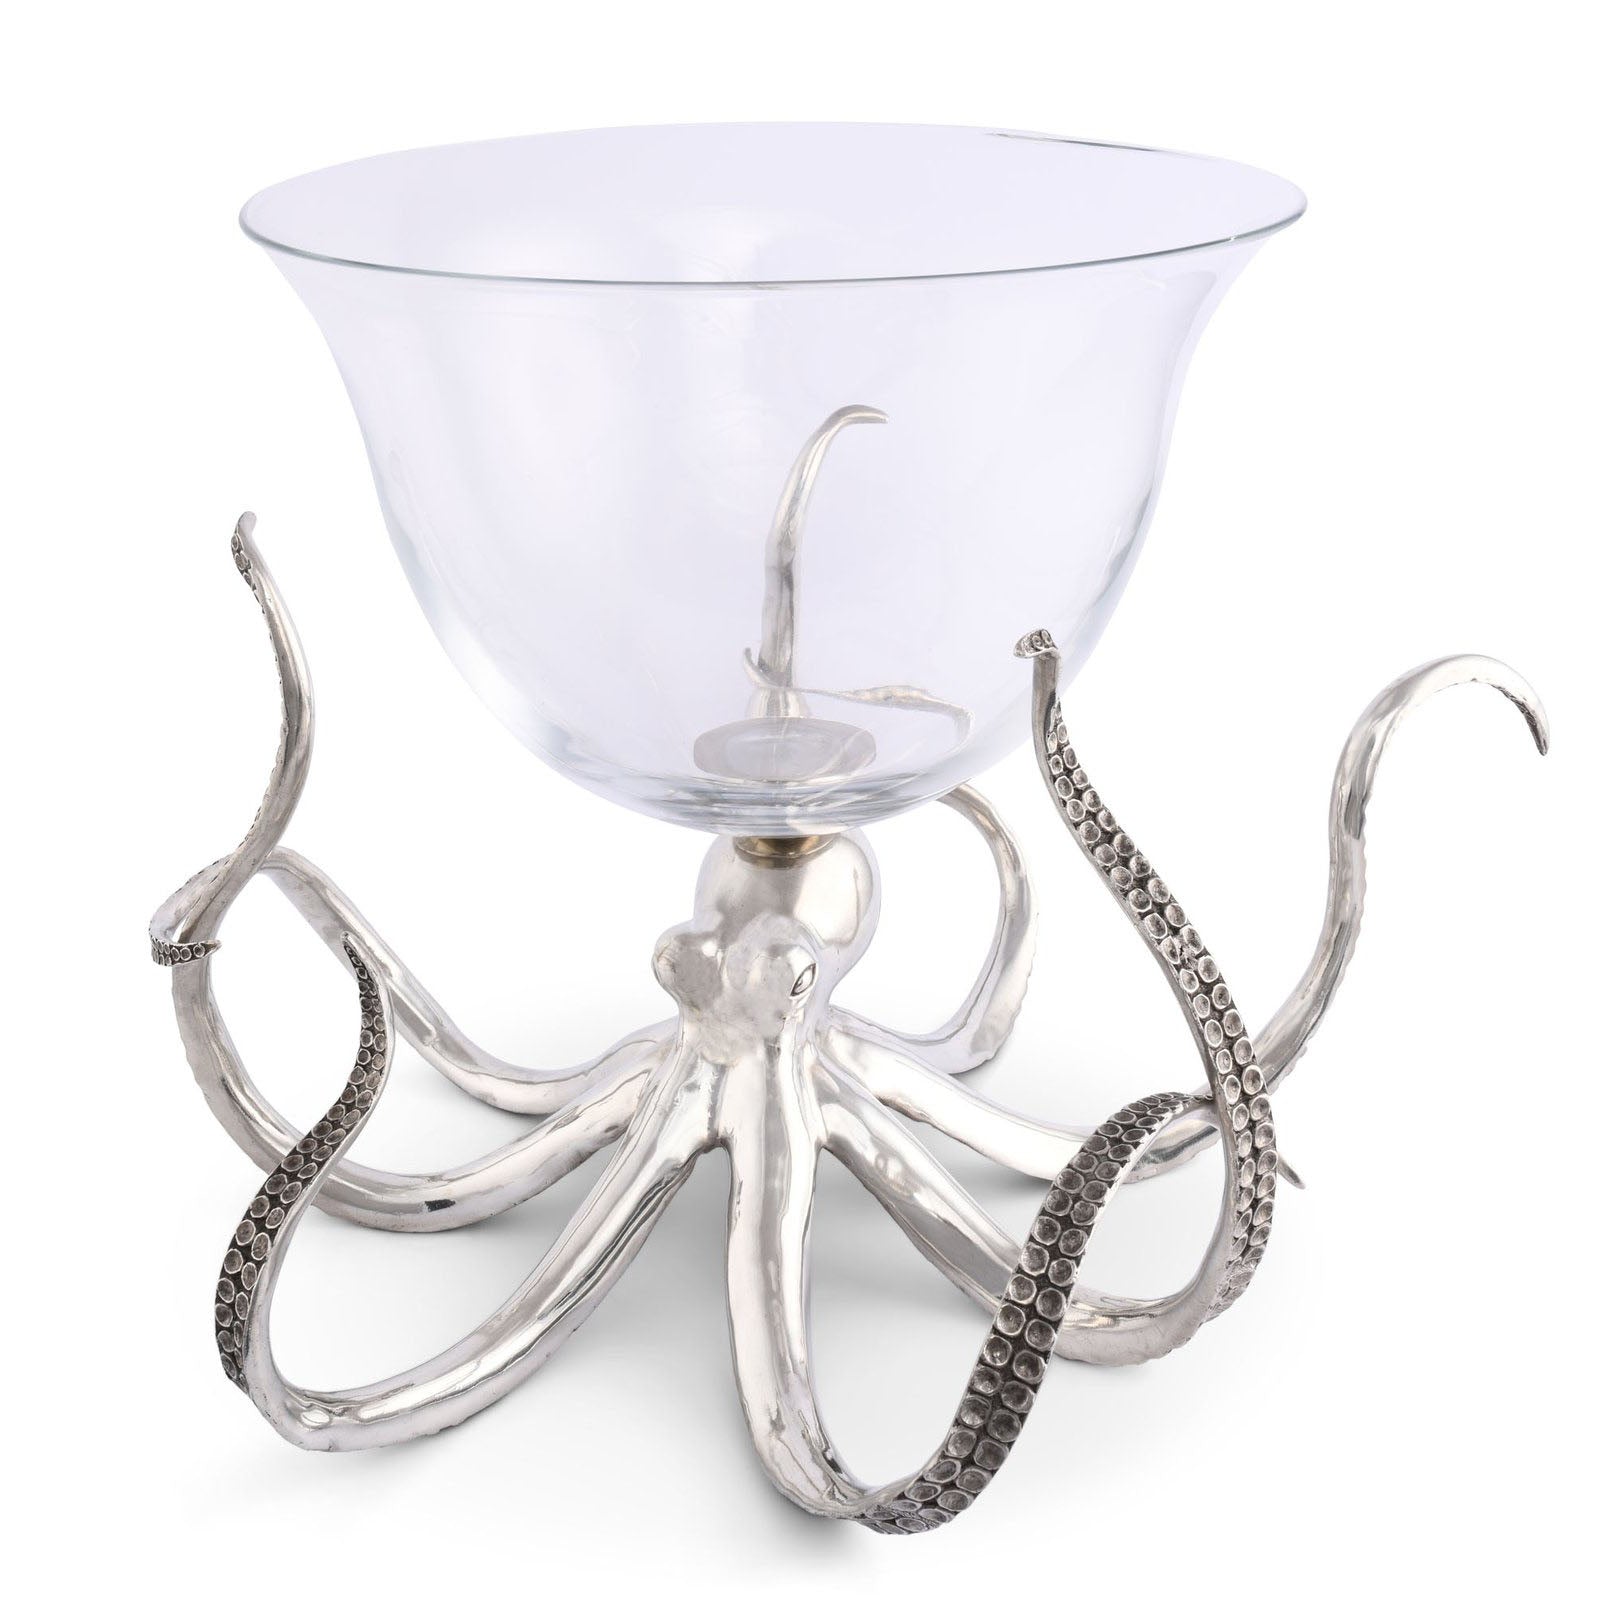 Pewter Octopus Kraken Holding Crystal Glass Ice Tub Punch Bowl  | Timothy De Clue Collection